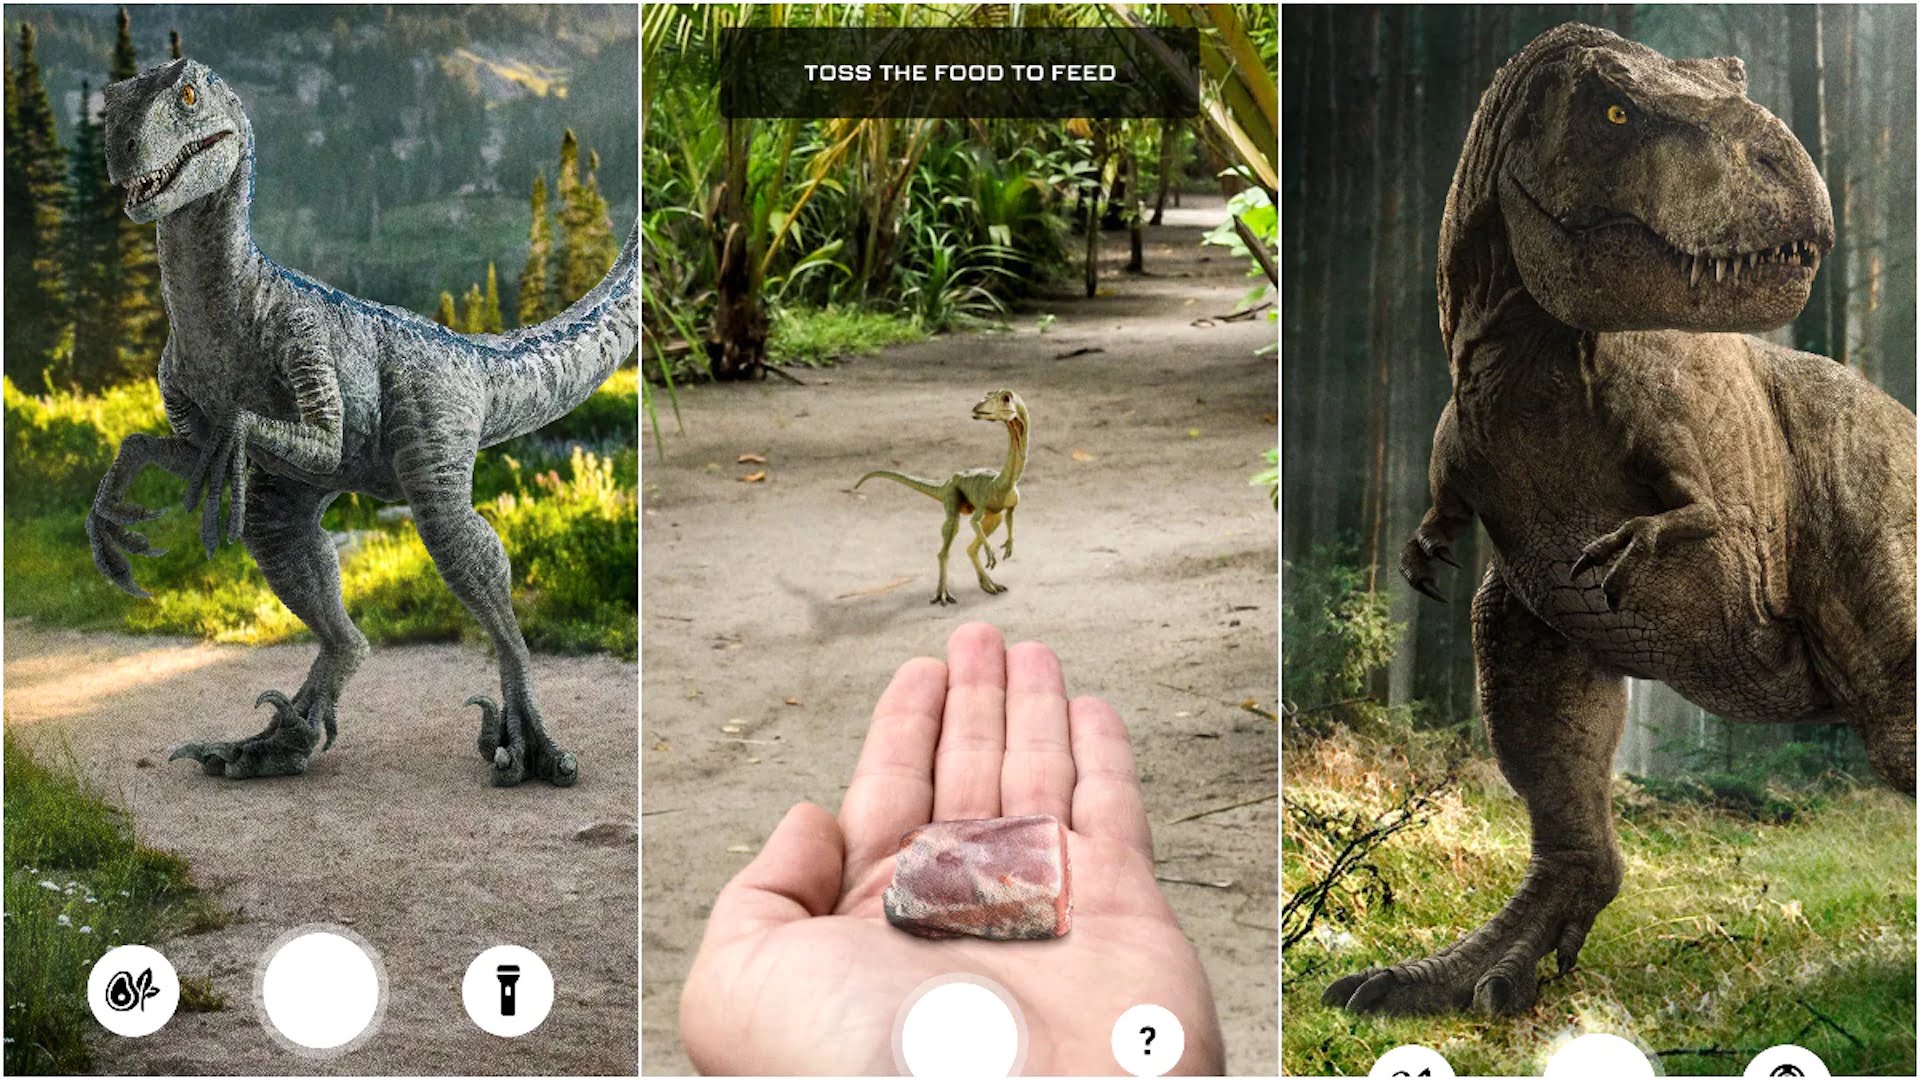 Jurassic World Dinotracker AR lets you find dinosaurs in the real world